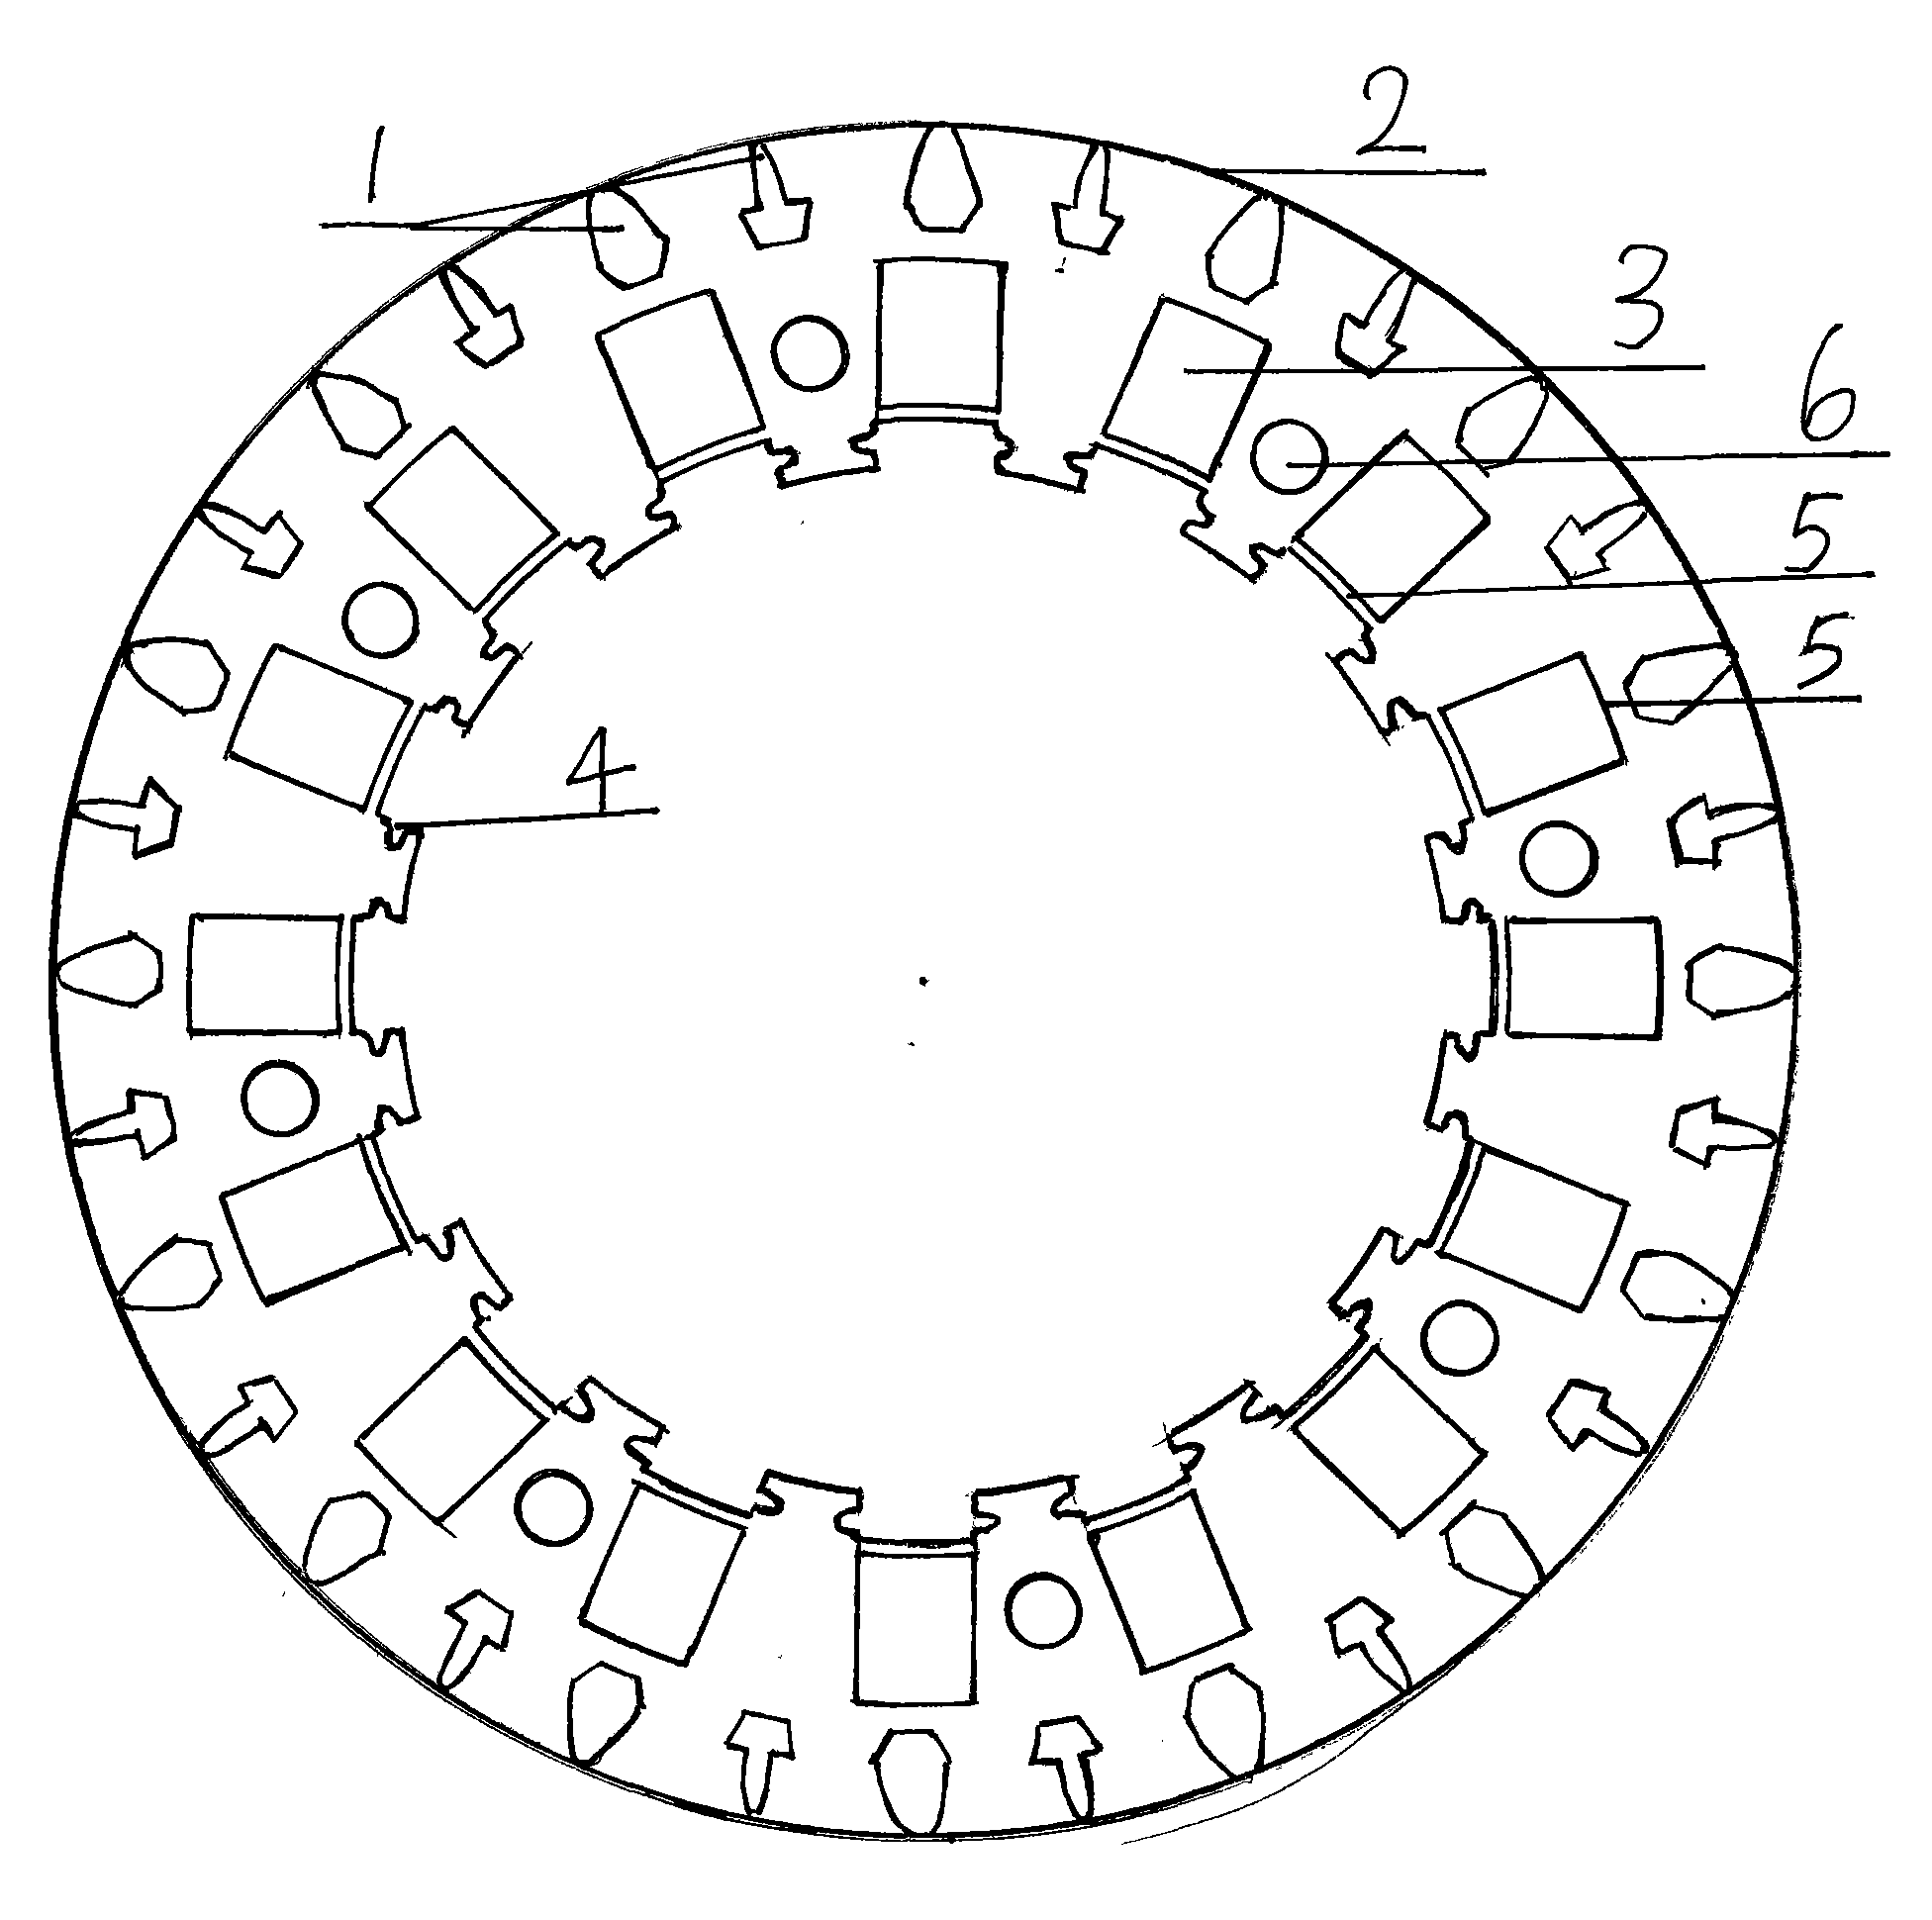 Rotor sheet of asynchronously-started PMSM (permanent magnet synchronous motor)